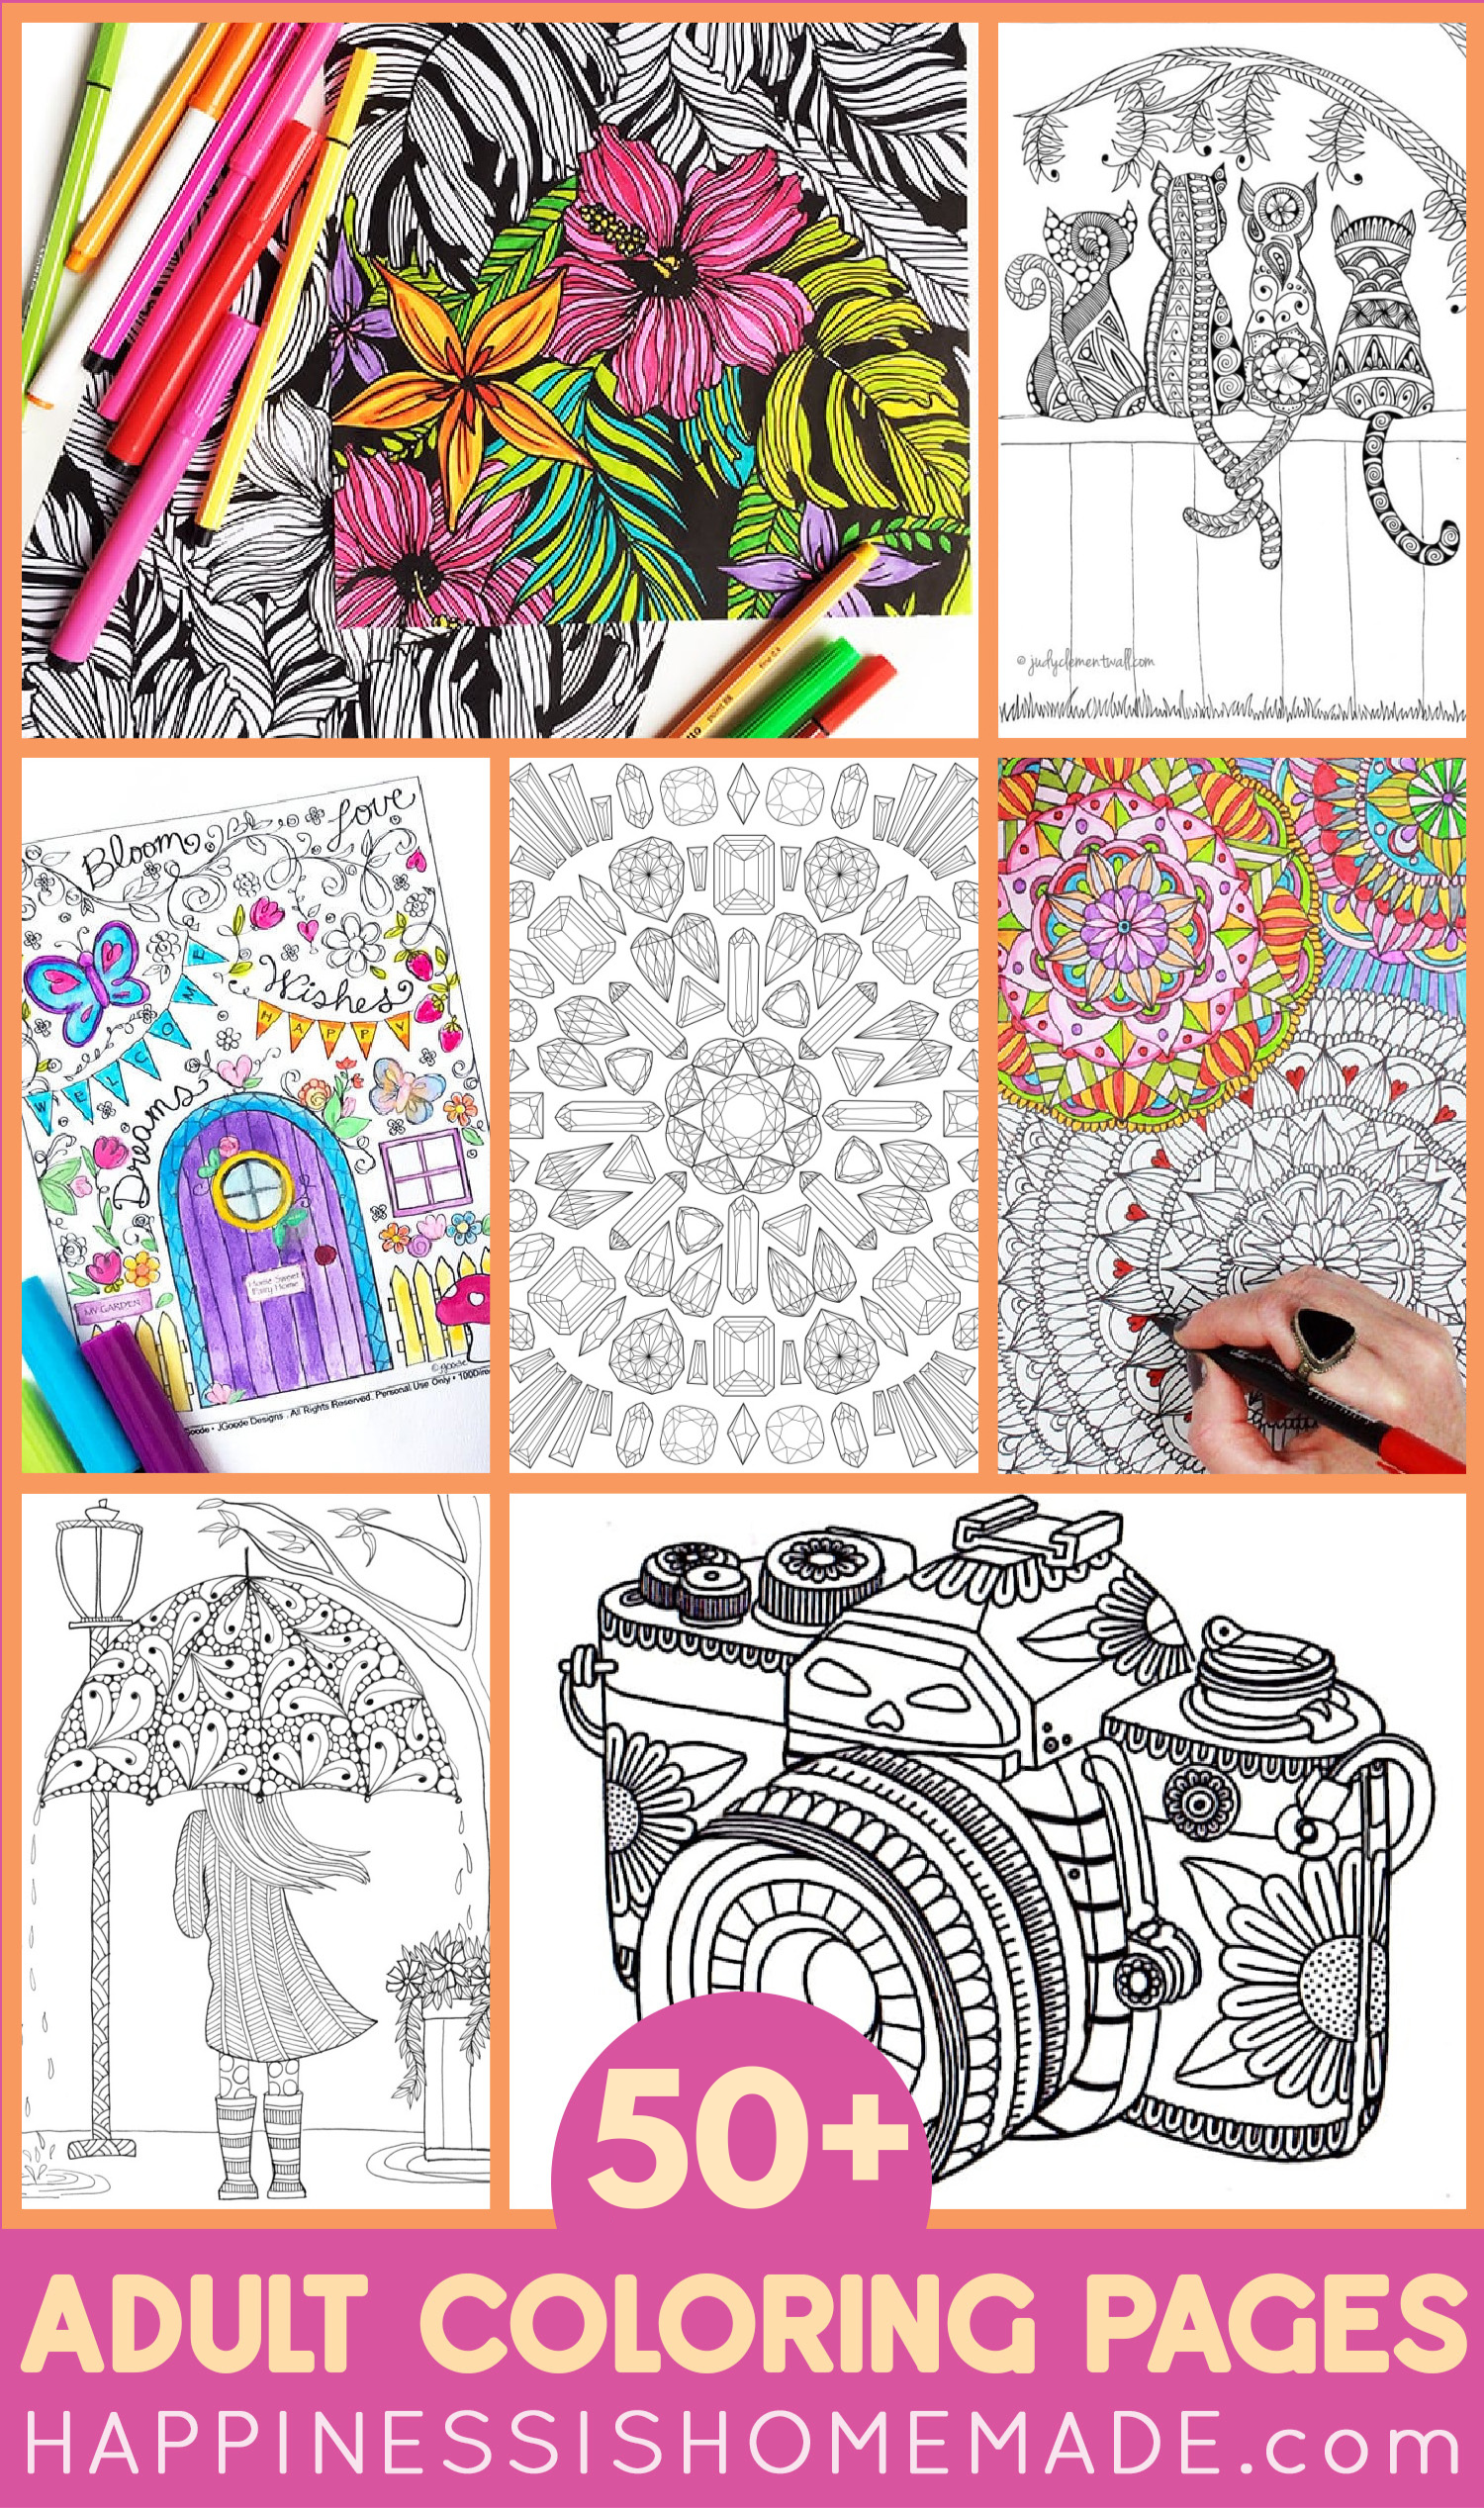 50+ Adult Coloring Pages